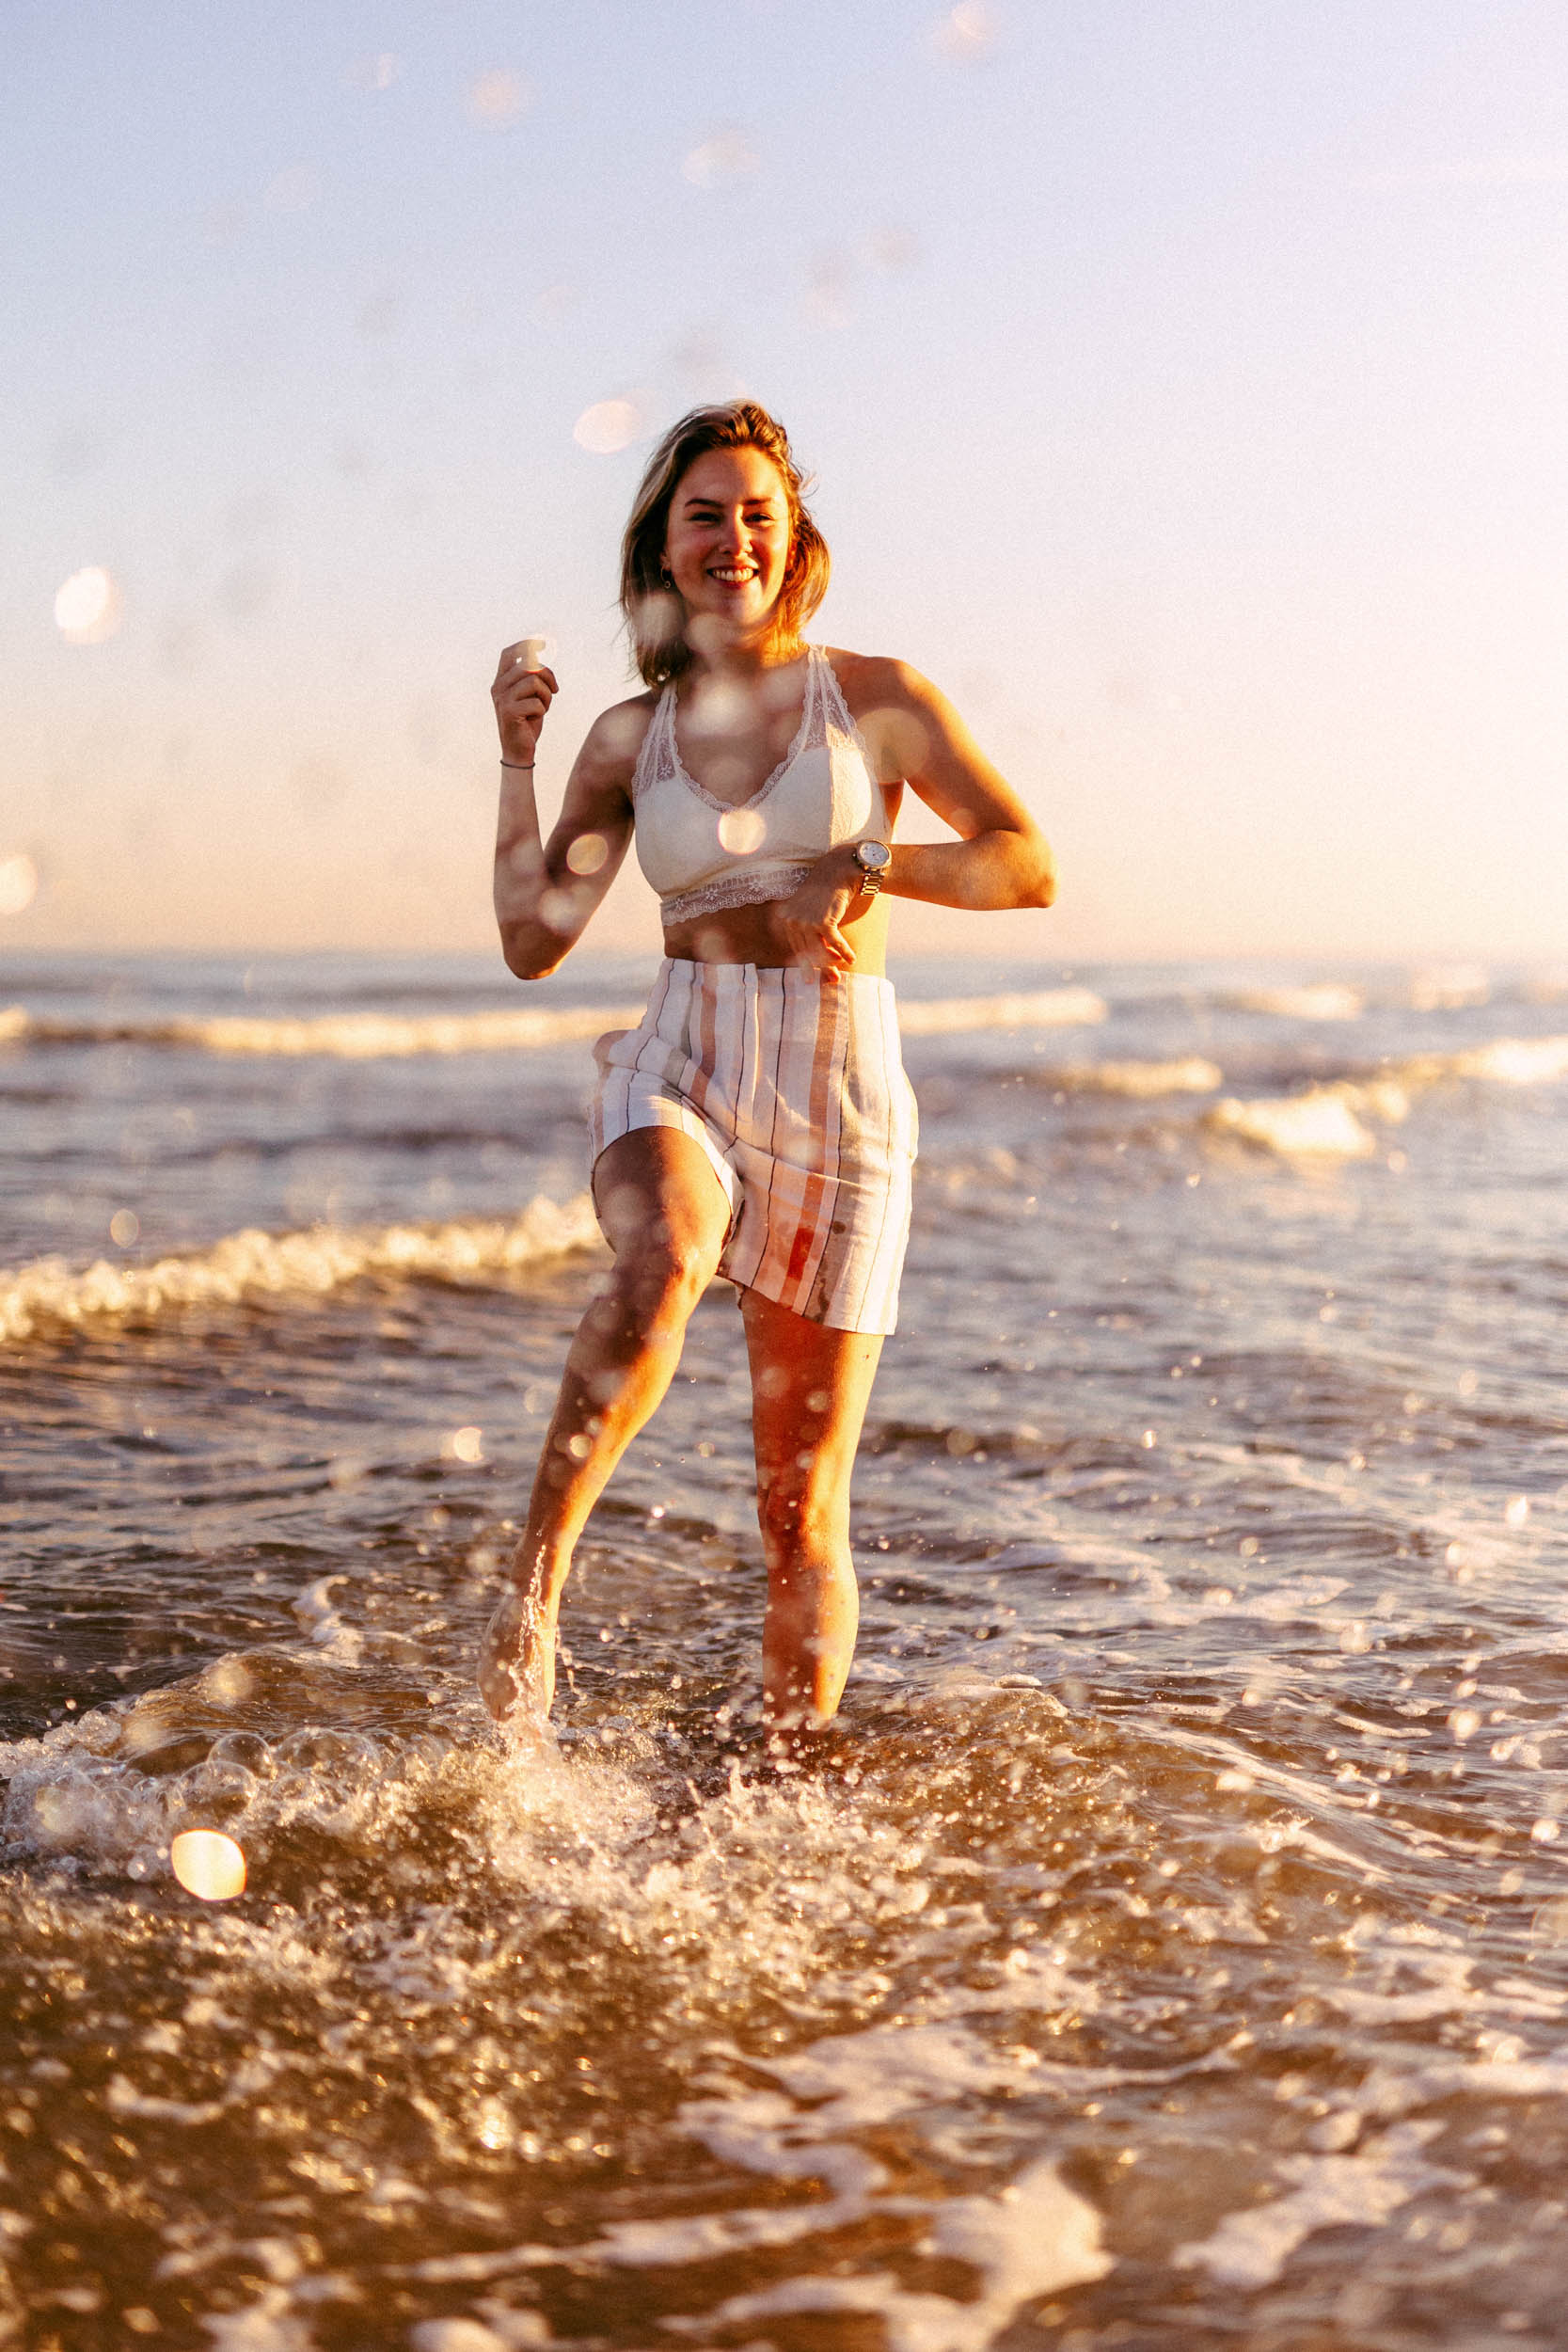 A woman poses for beach photos while running in the ocean at sunset.